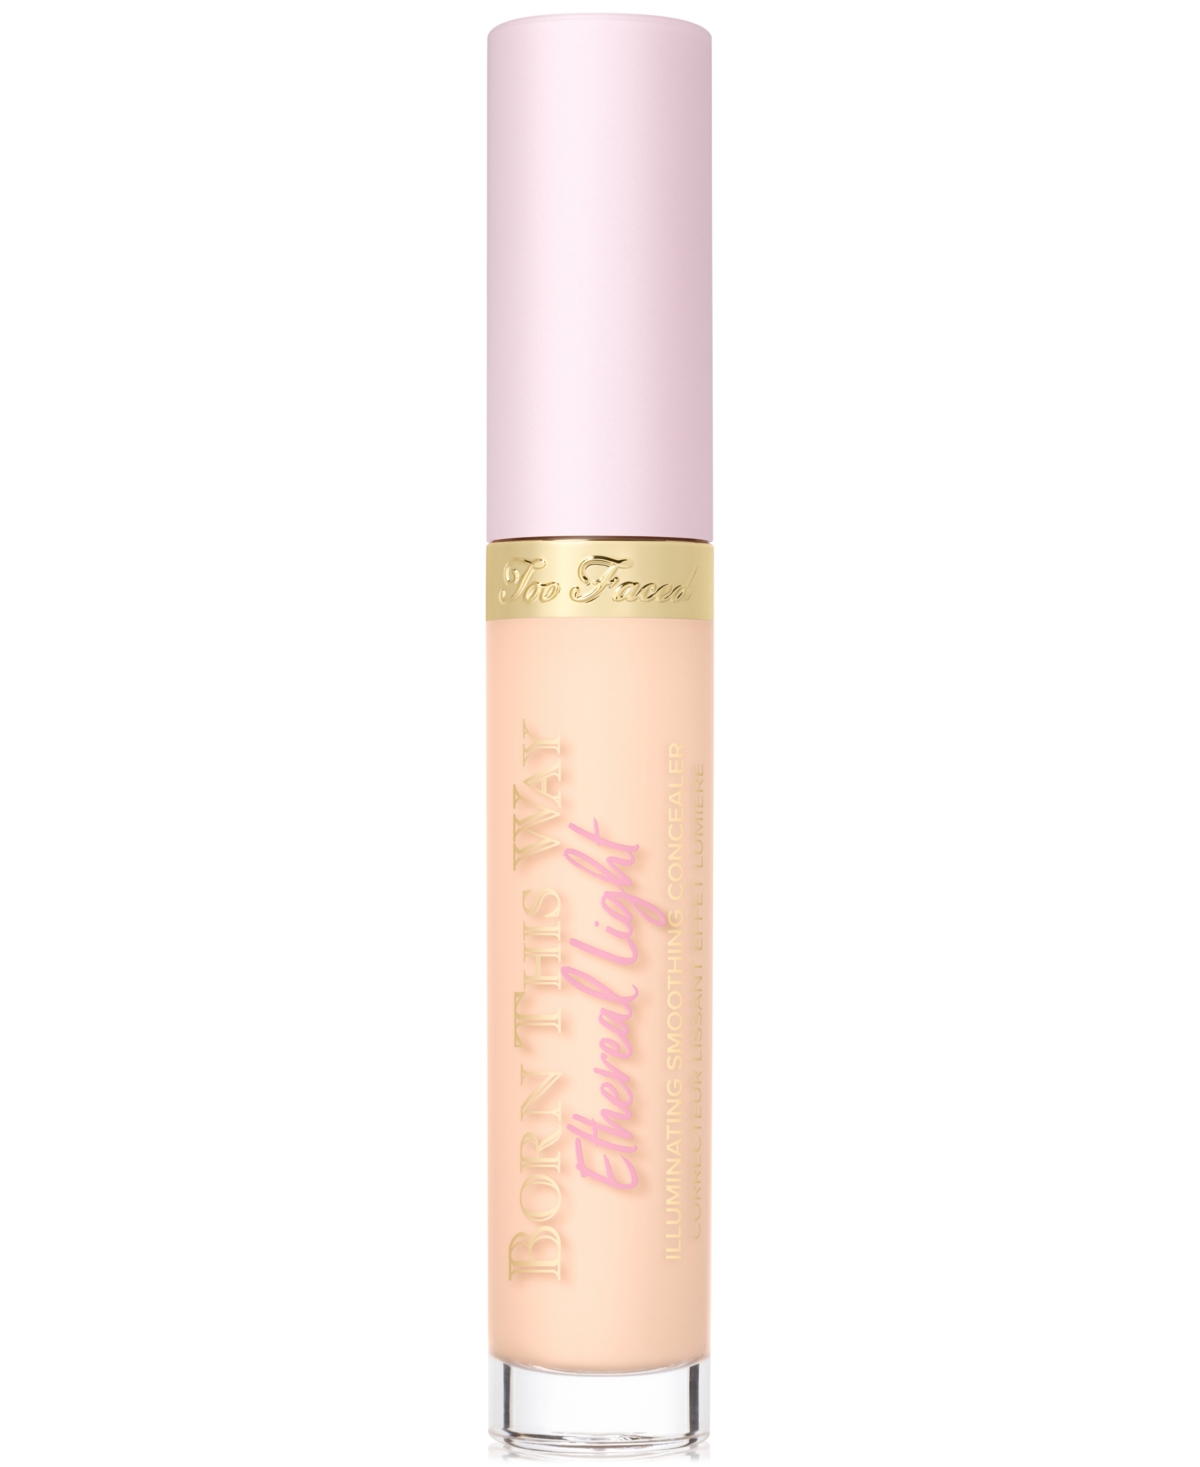 Too Faced Born This Way Ethereal Light Illuminating Smoothing Concealer In Buttercup - Light With Neutral Undertone